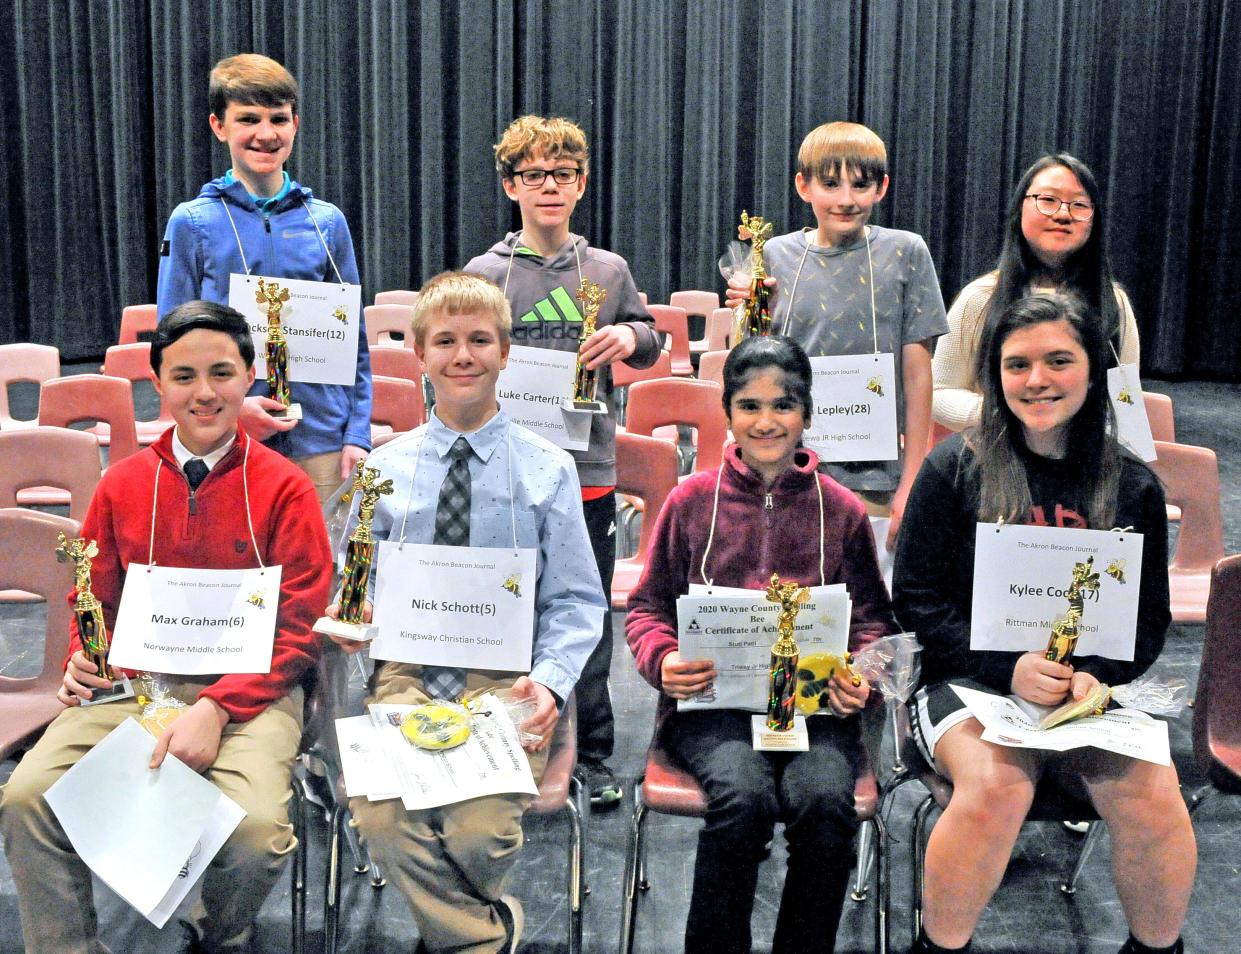 The top eight spellers from the Wayne County 2020 Spelling Bee who went on to the regional bee in Akron are Max Graham (front left), Nick Schott, Stuto Patil, champion, Kylee Cool, Jackson Stansifer (back left), Luke Carter, Gavin Lepley and Irene Lee.